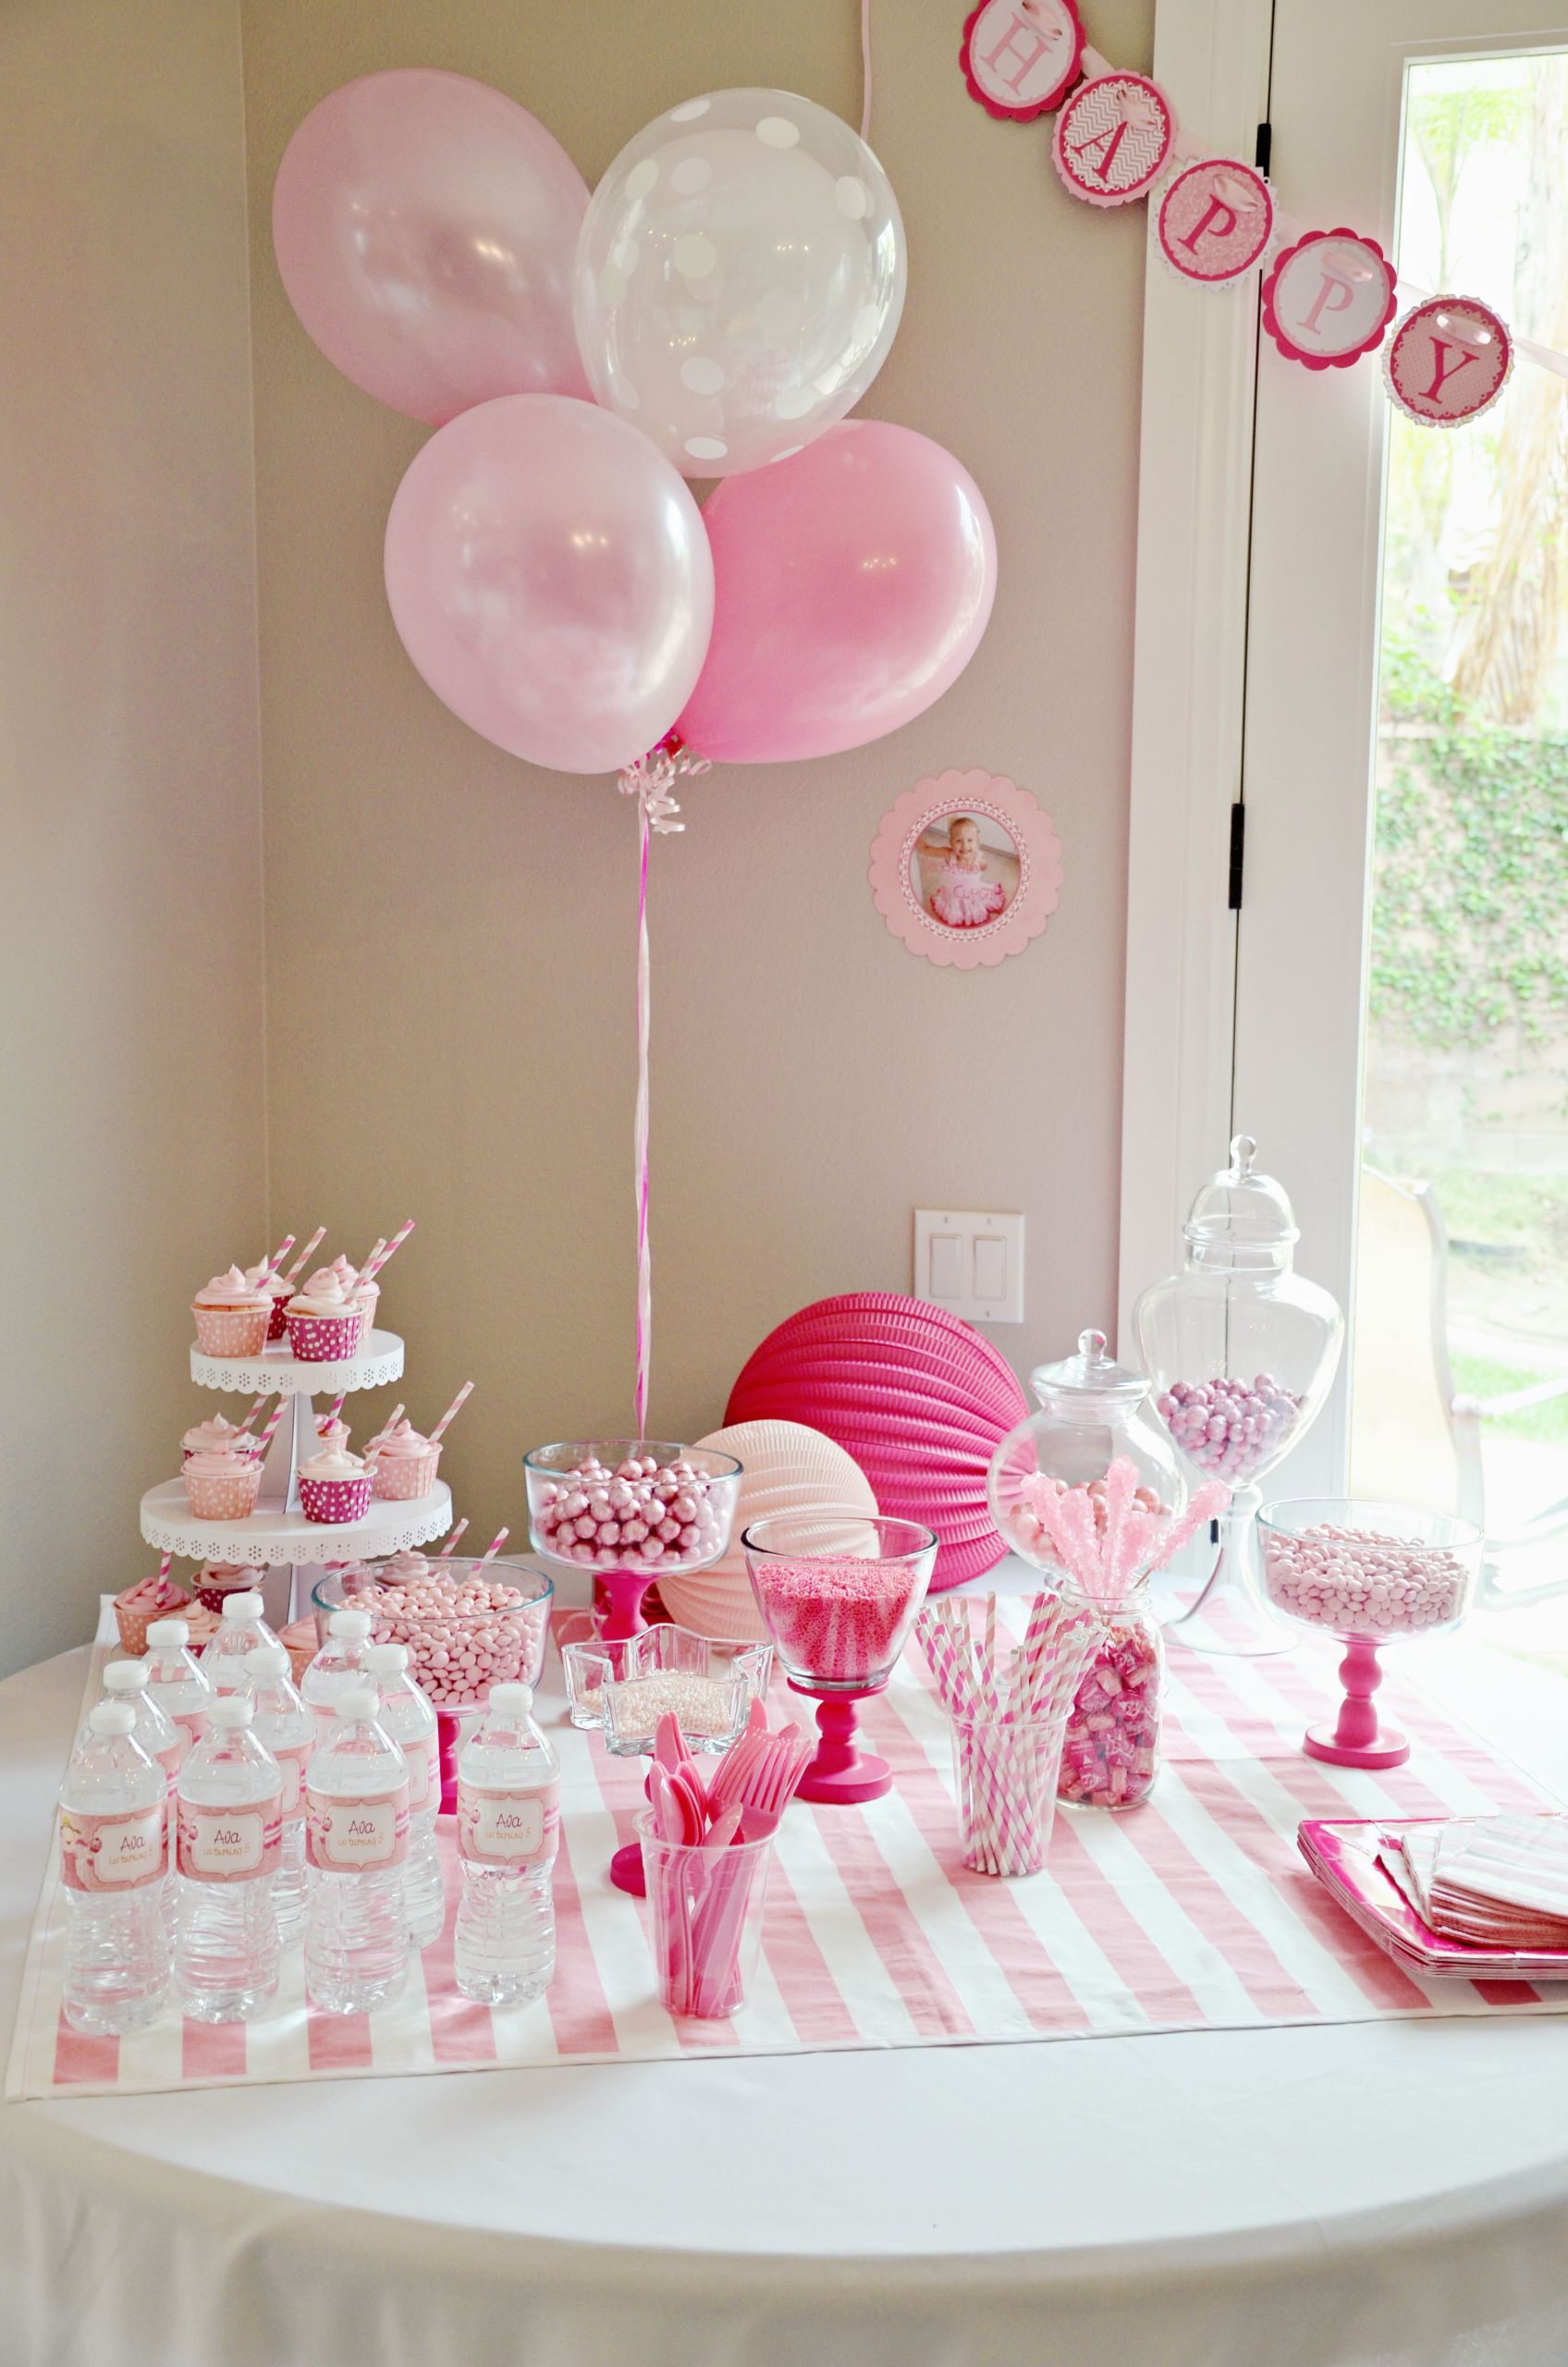 2 Yr Old Girl Birthday Party Ideas
 A Pinkalicious themed party for a 3 year old